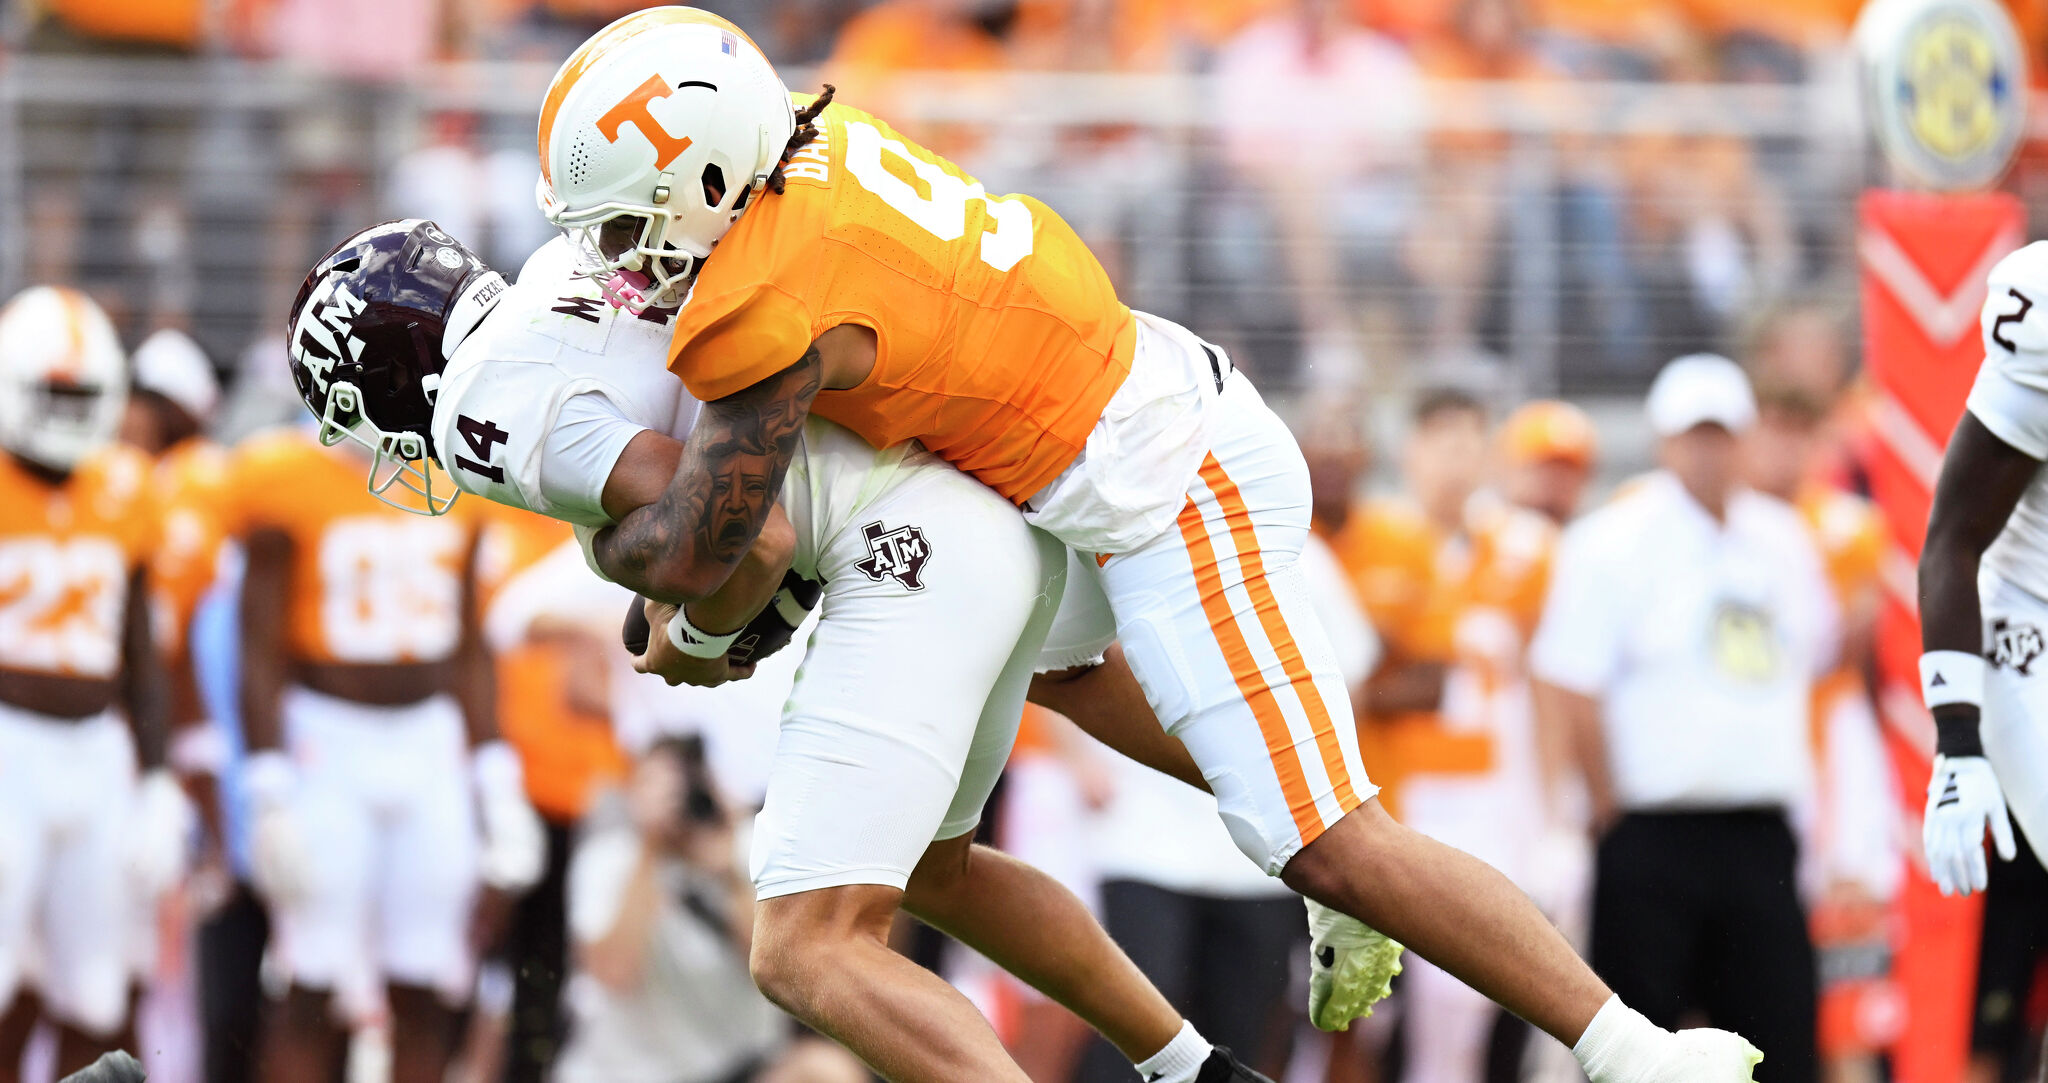 Former Tennessee receiver Josh Smith explains why Vols fell apart